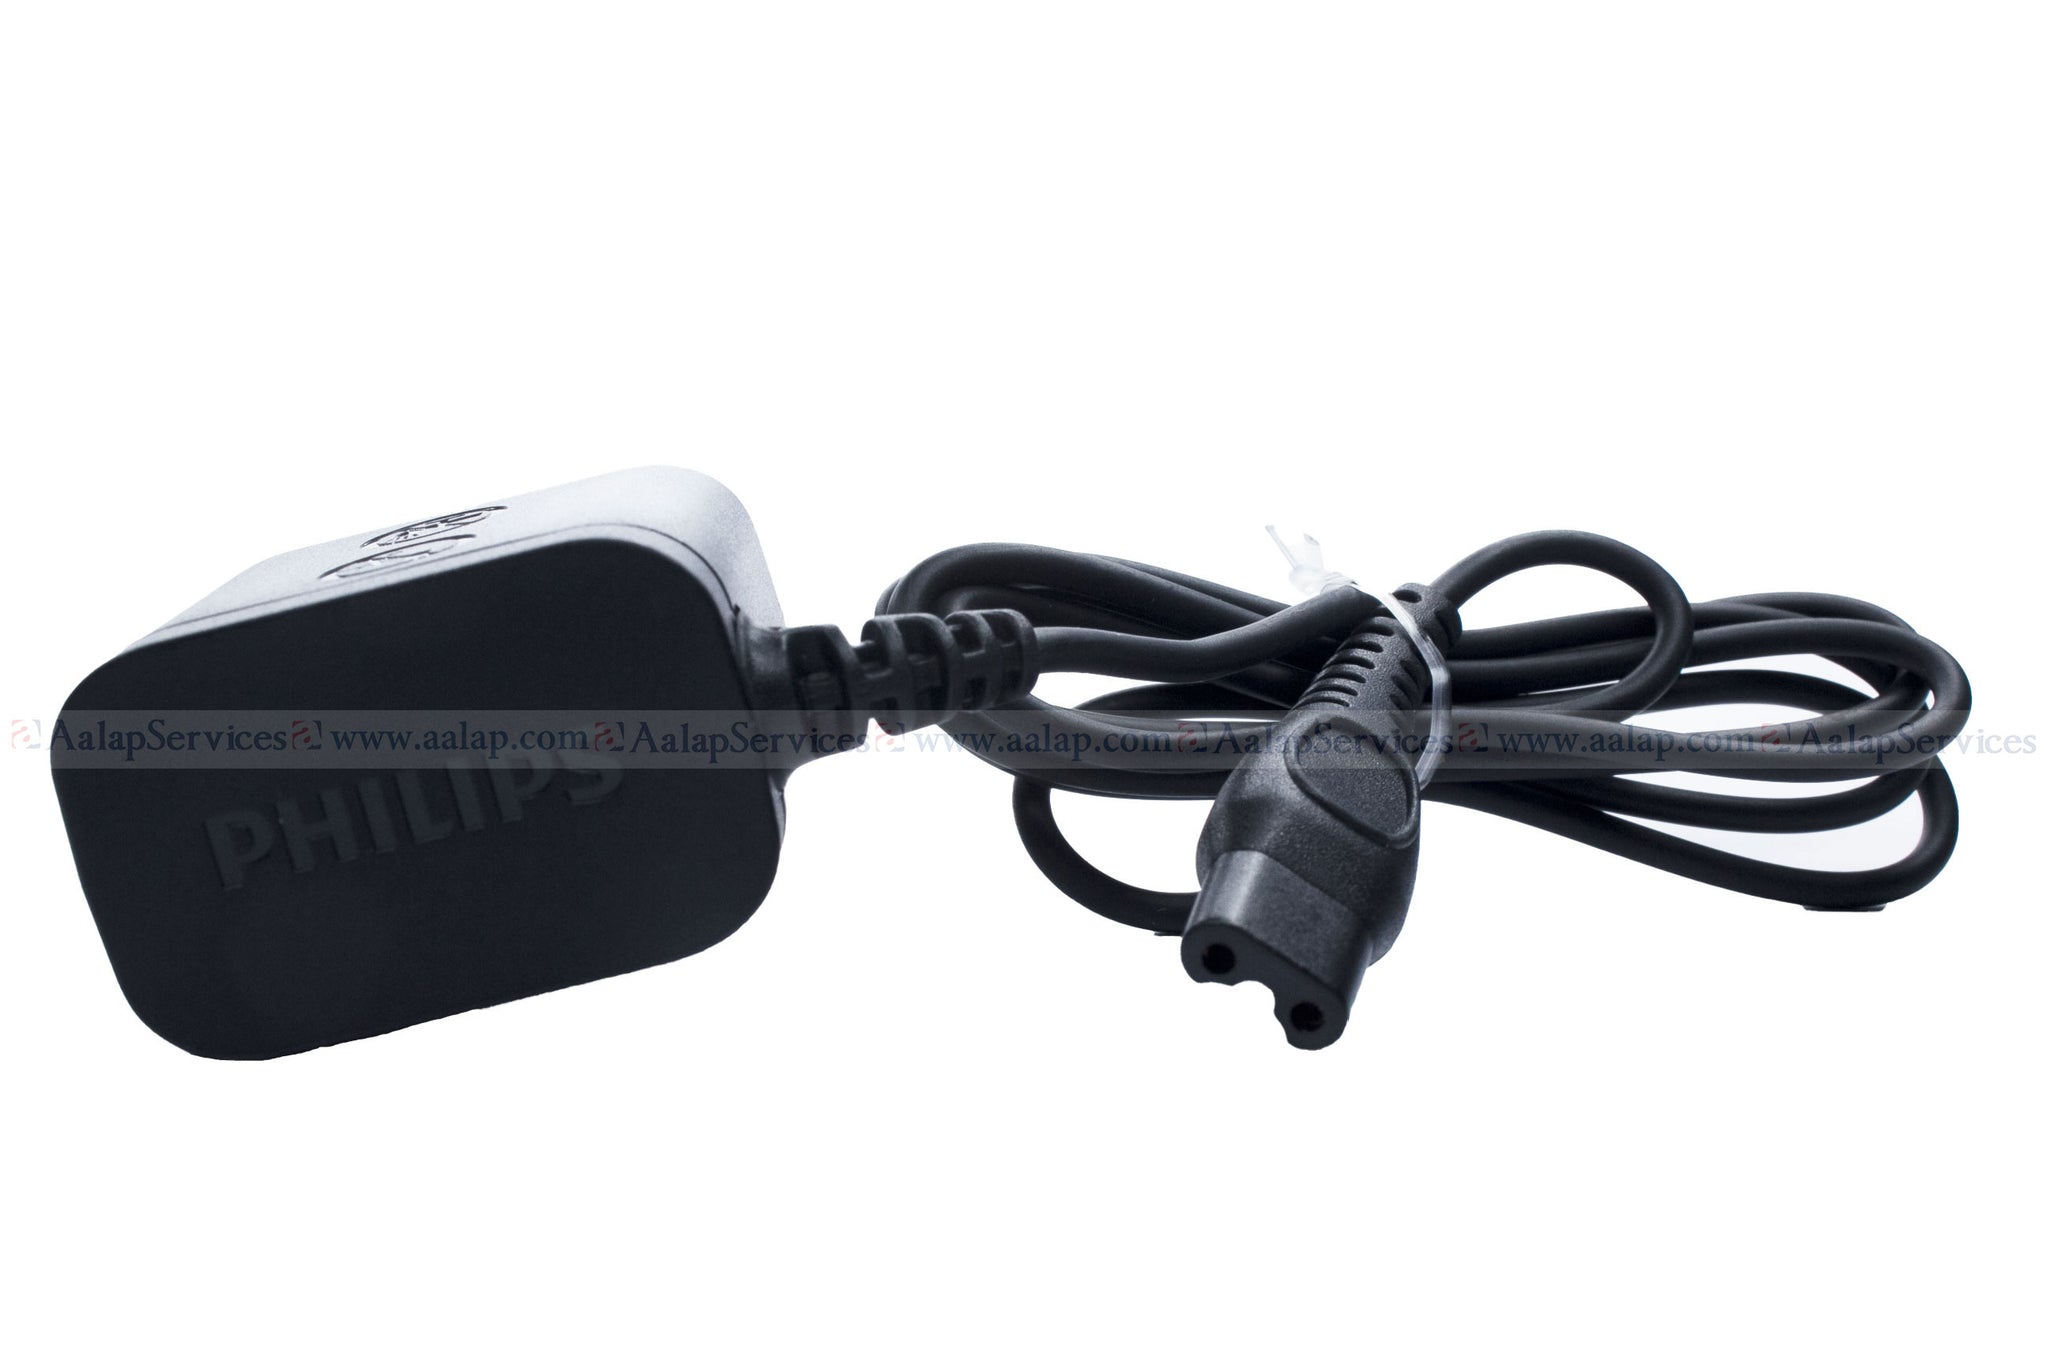 philips bt3211 charger